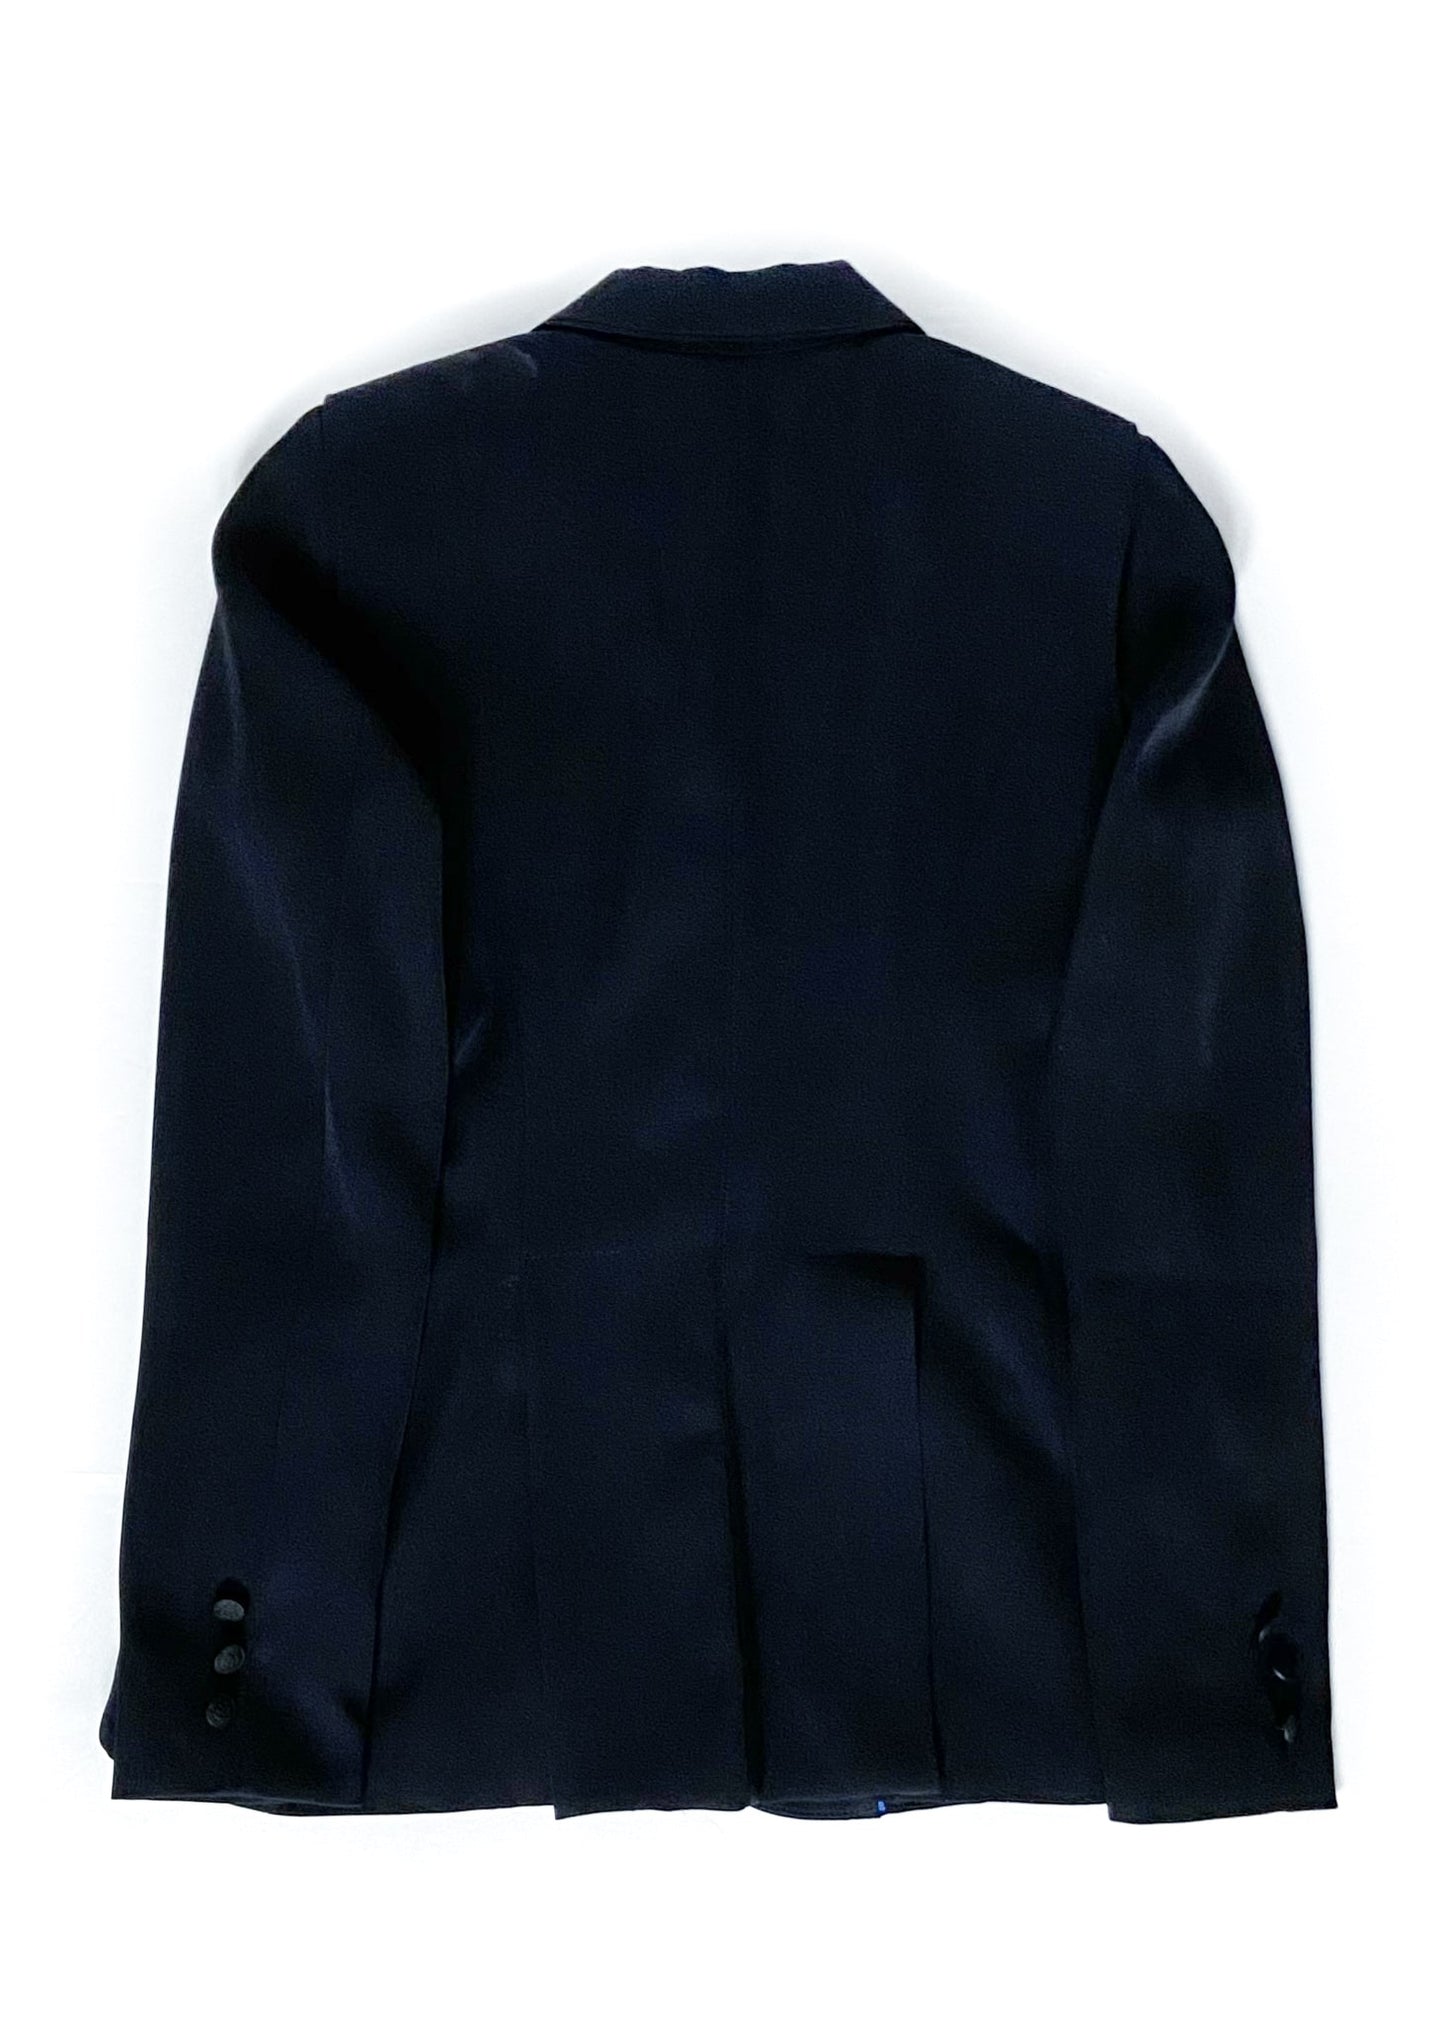 Ariat Soft Shell Competition Jacket - Navy - Women's 6L